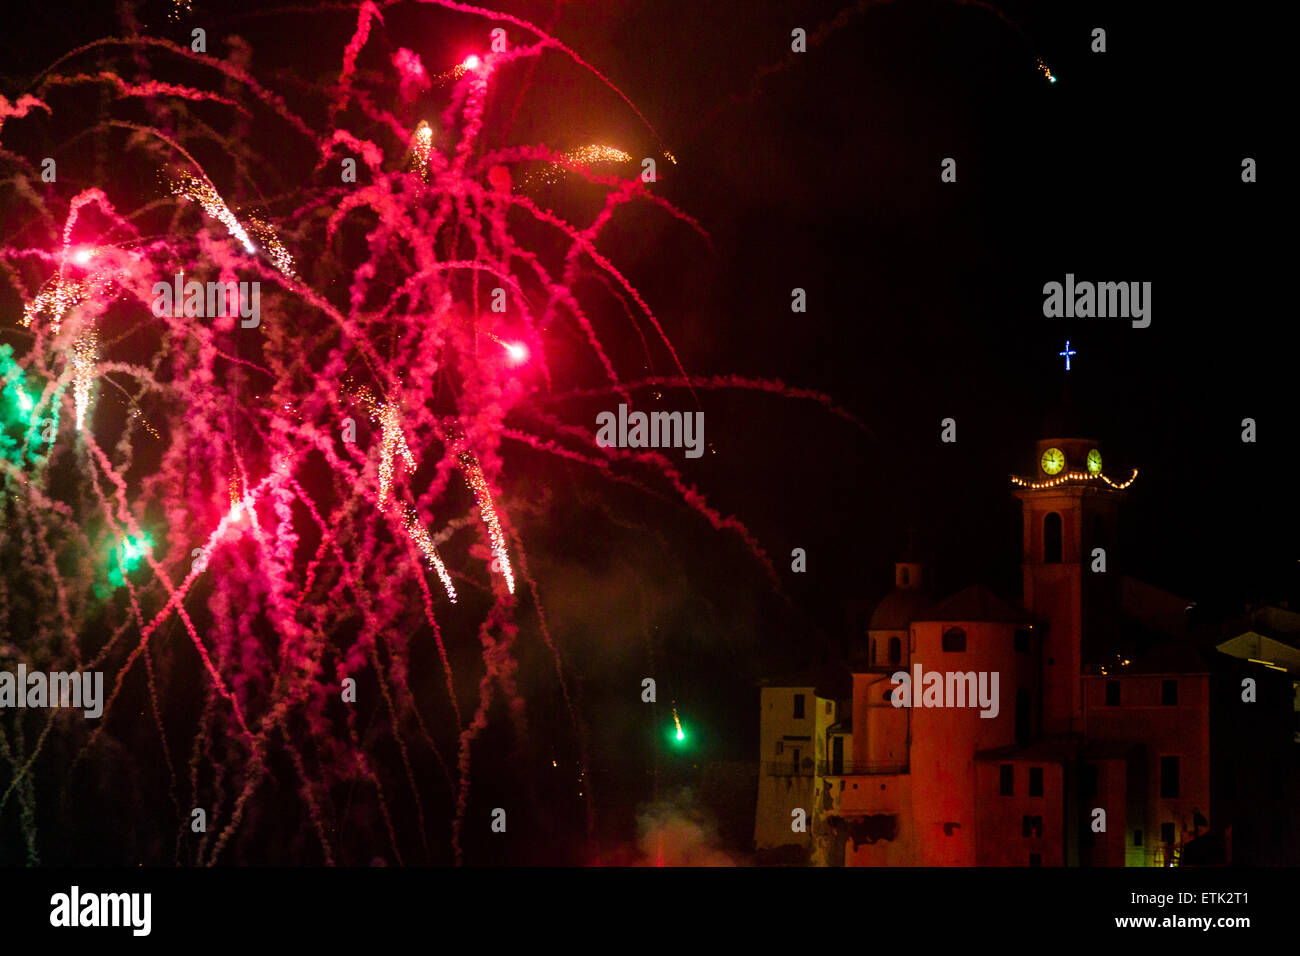 Fireworks over Camogli at Sagre del Pesce, ITtaly Stock Photo